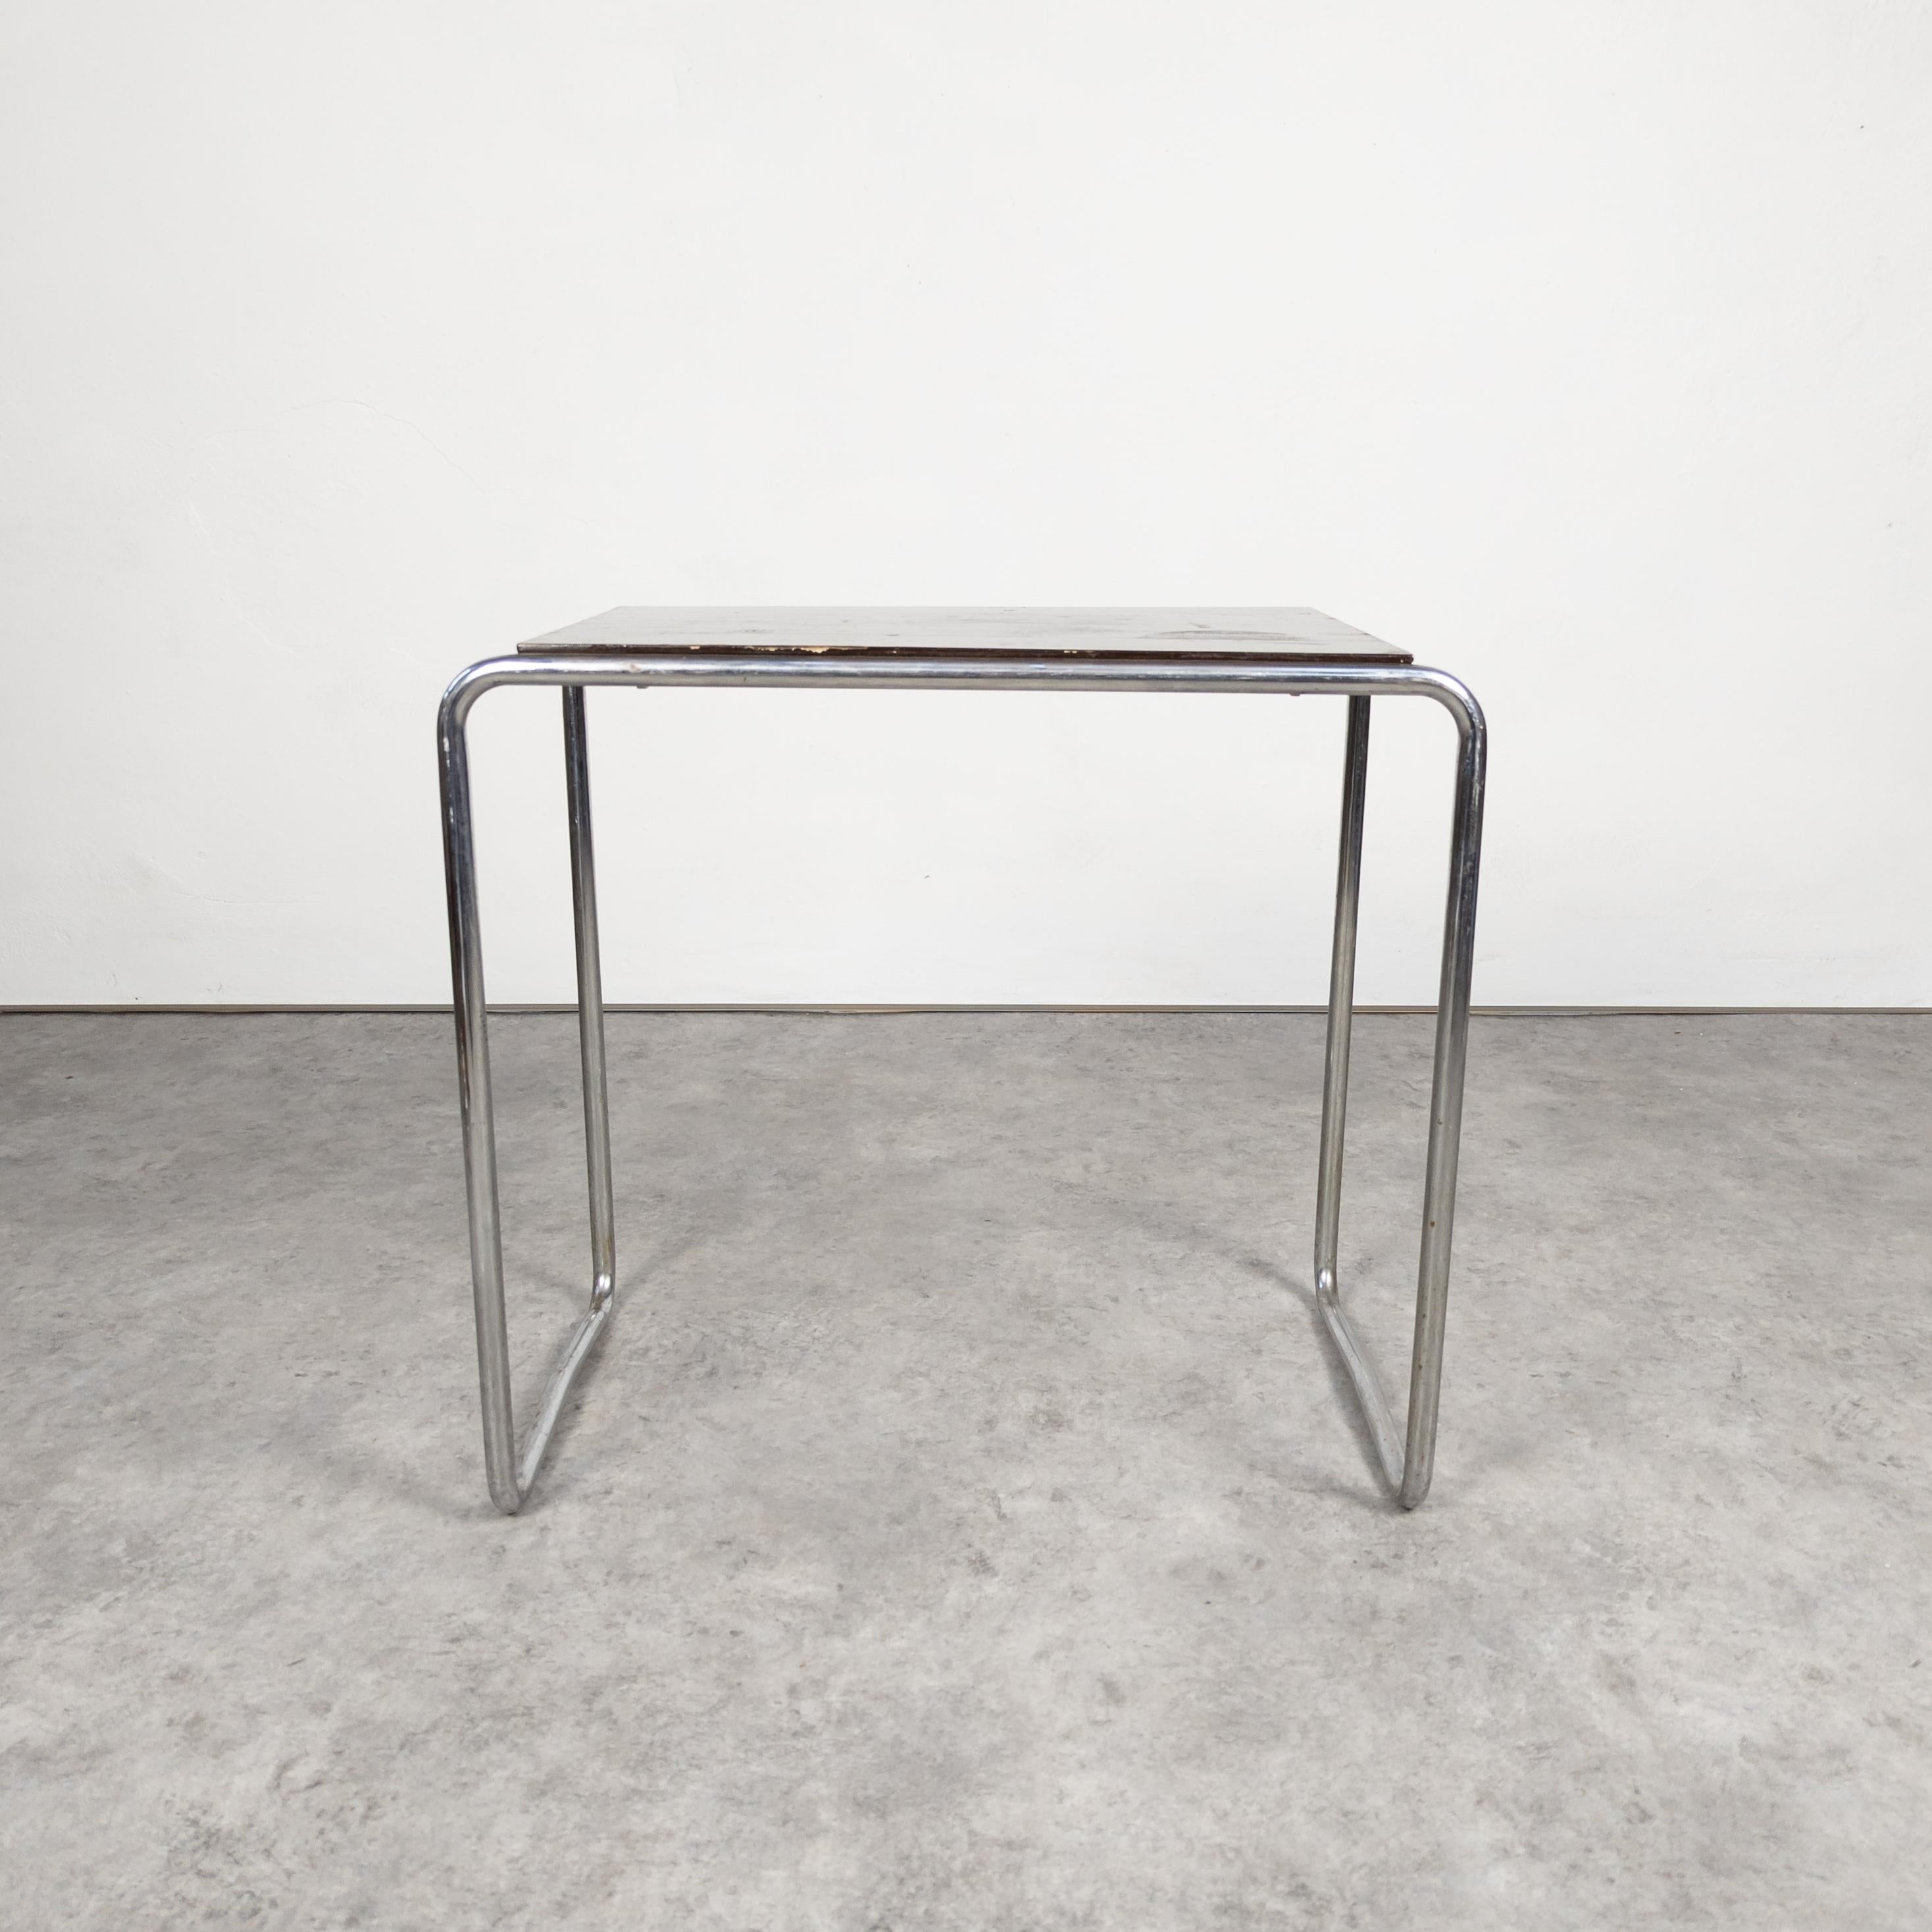 The Thonet B 9 designed in 1920´s by Marcel Breuer is one of the most popular furniture designs to have emerged at the Bauhaus. Unusual version with uniquely bent tubes at the bottom. This piece is in very good original condition, consistent with